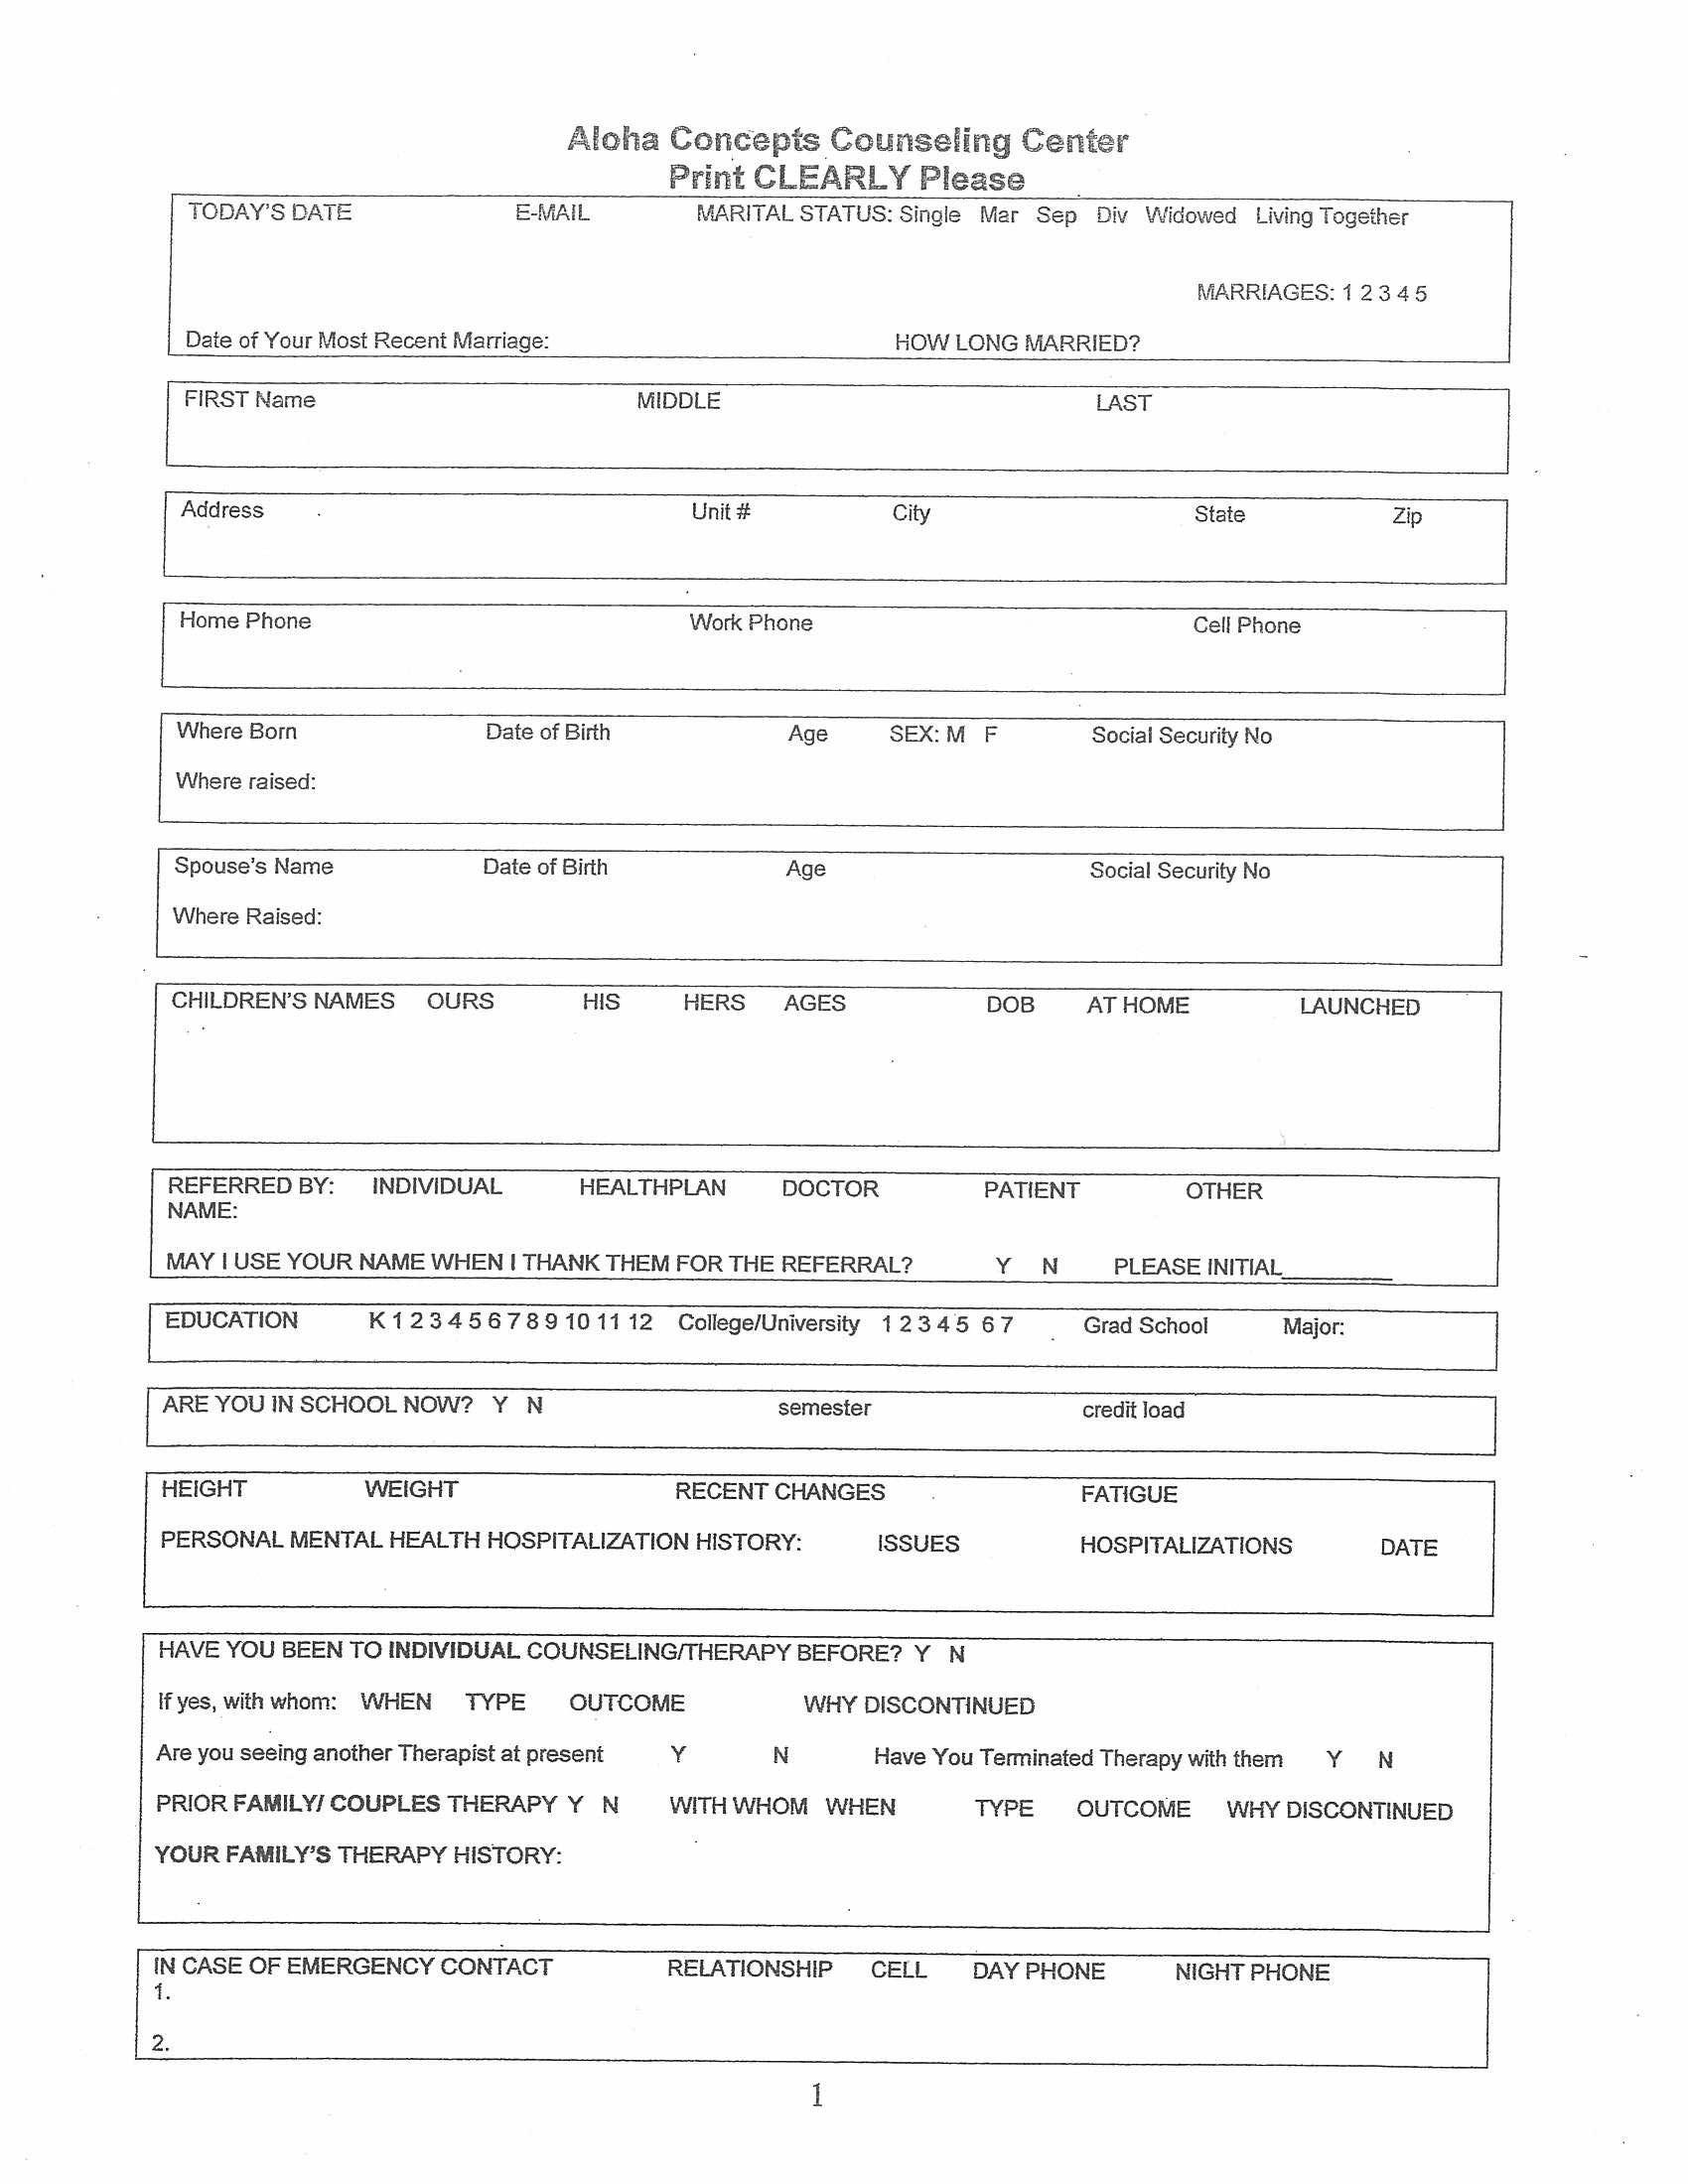 Counseling Intake form Template 6 Best S Of Life Coaching Intake forms and Templates